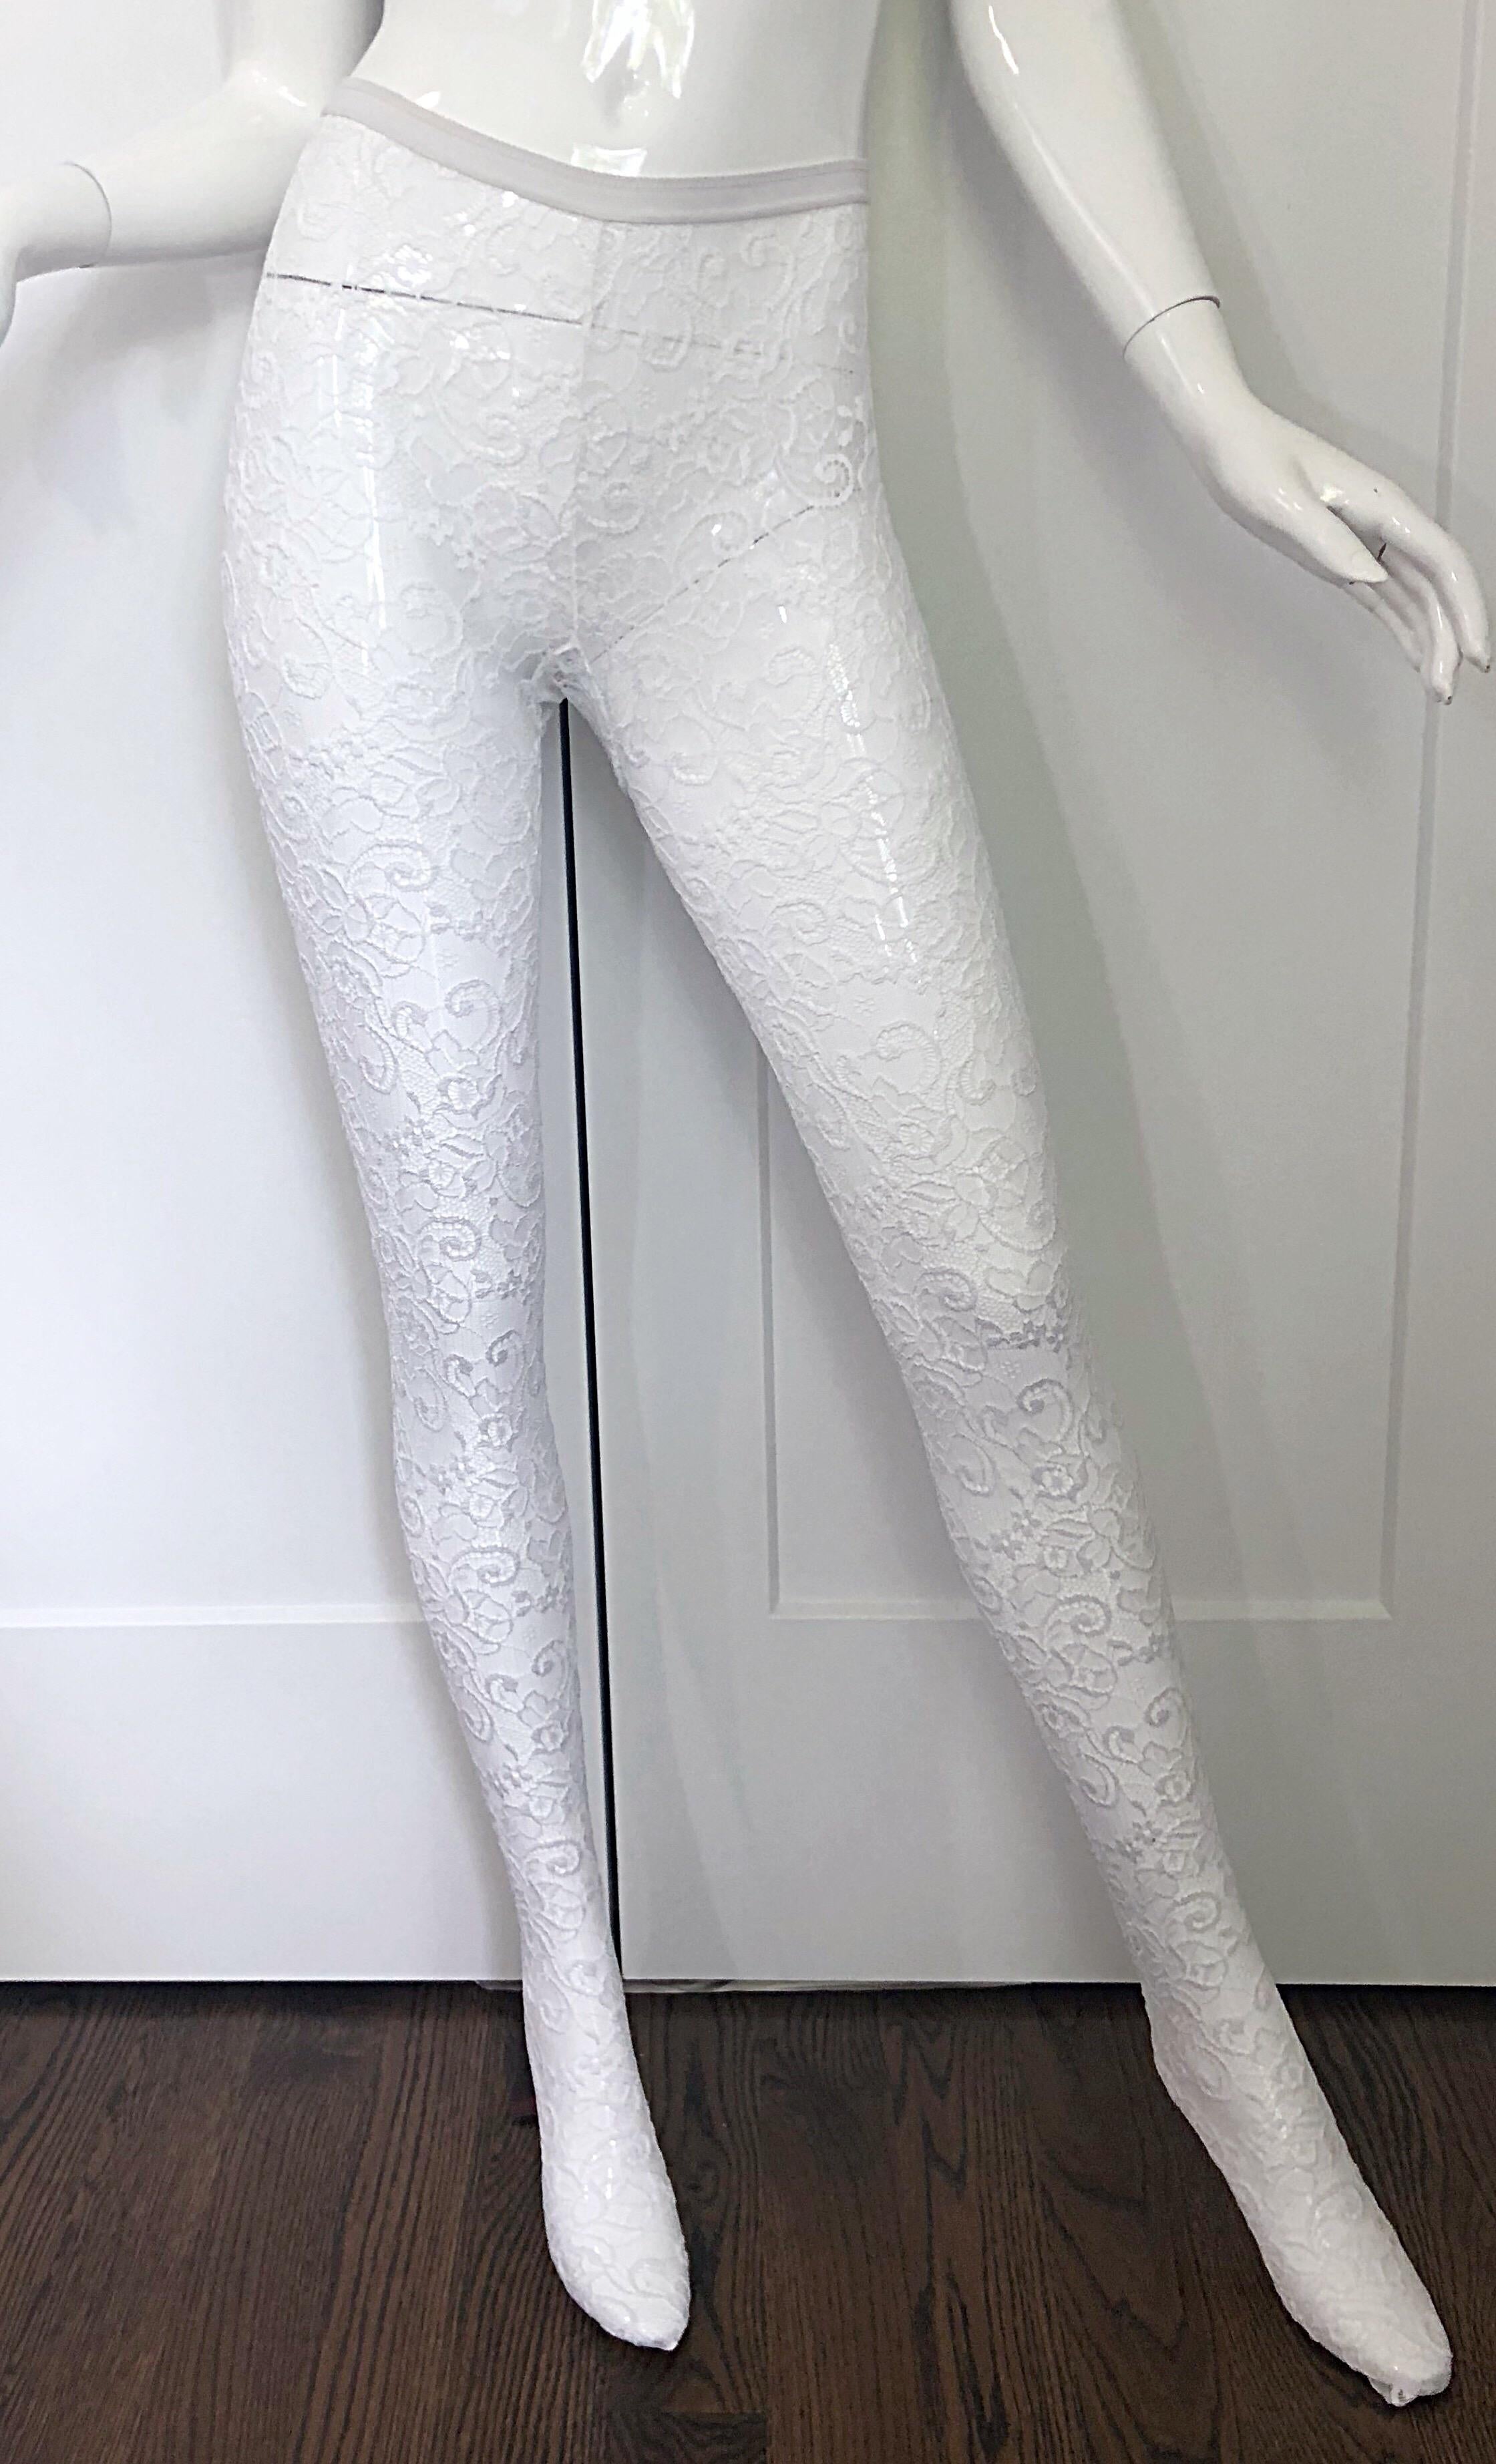 Gray Never Worn Gianni Versace 1990s White Lace Vintage Panty Hose Leggings Stockings